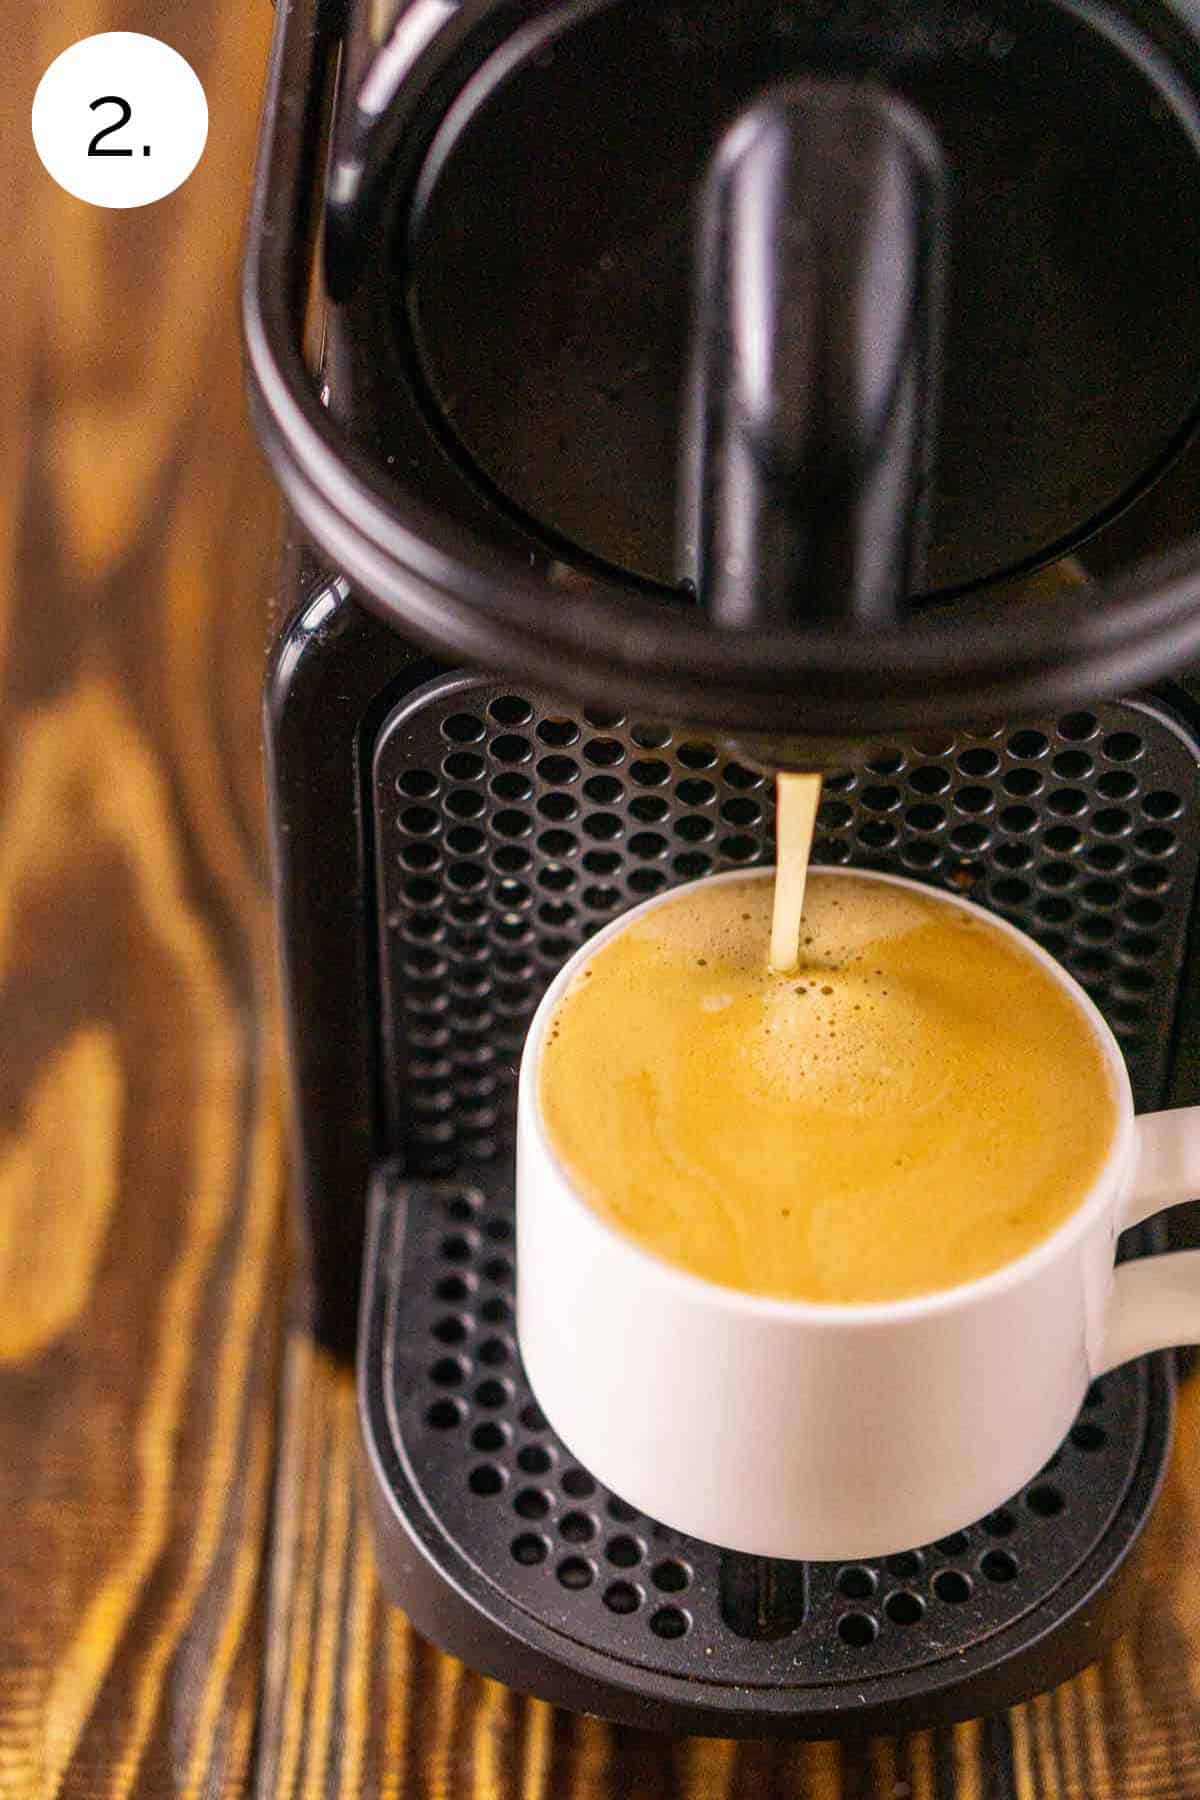 A Nespresso machine making a fresh cup of espresso on a brown wooden surface.